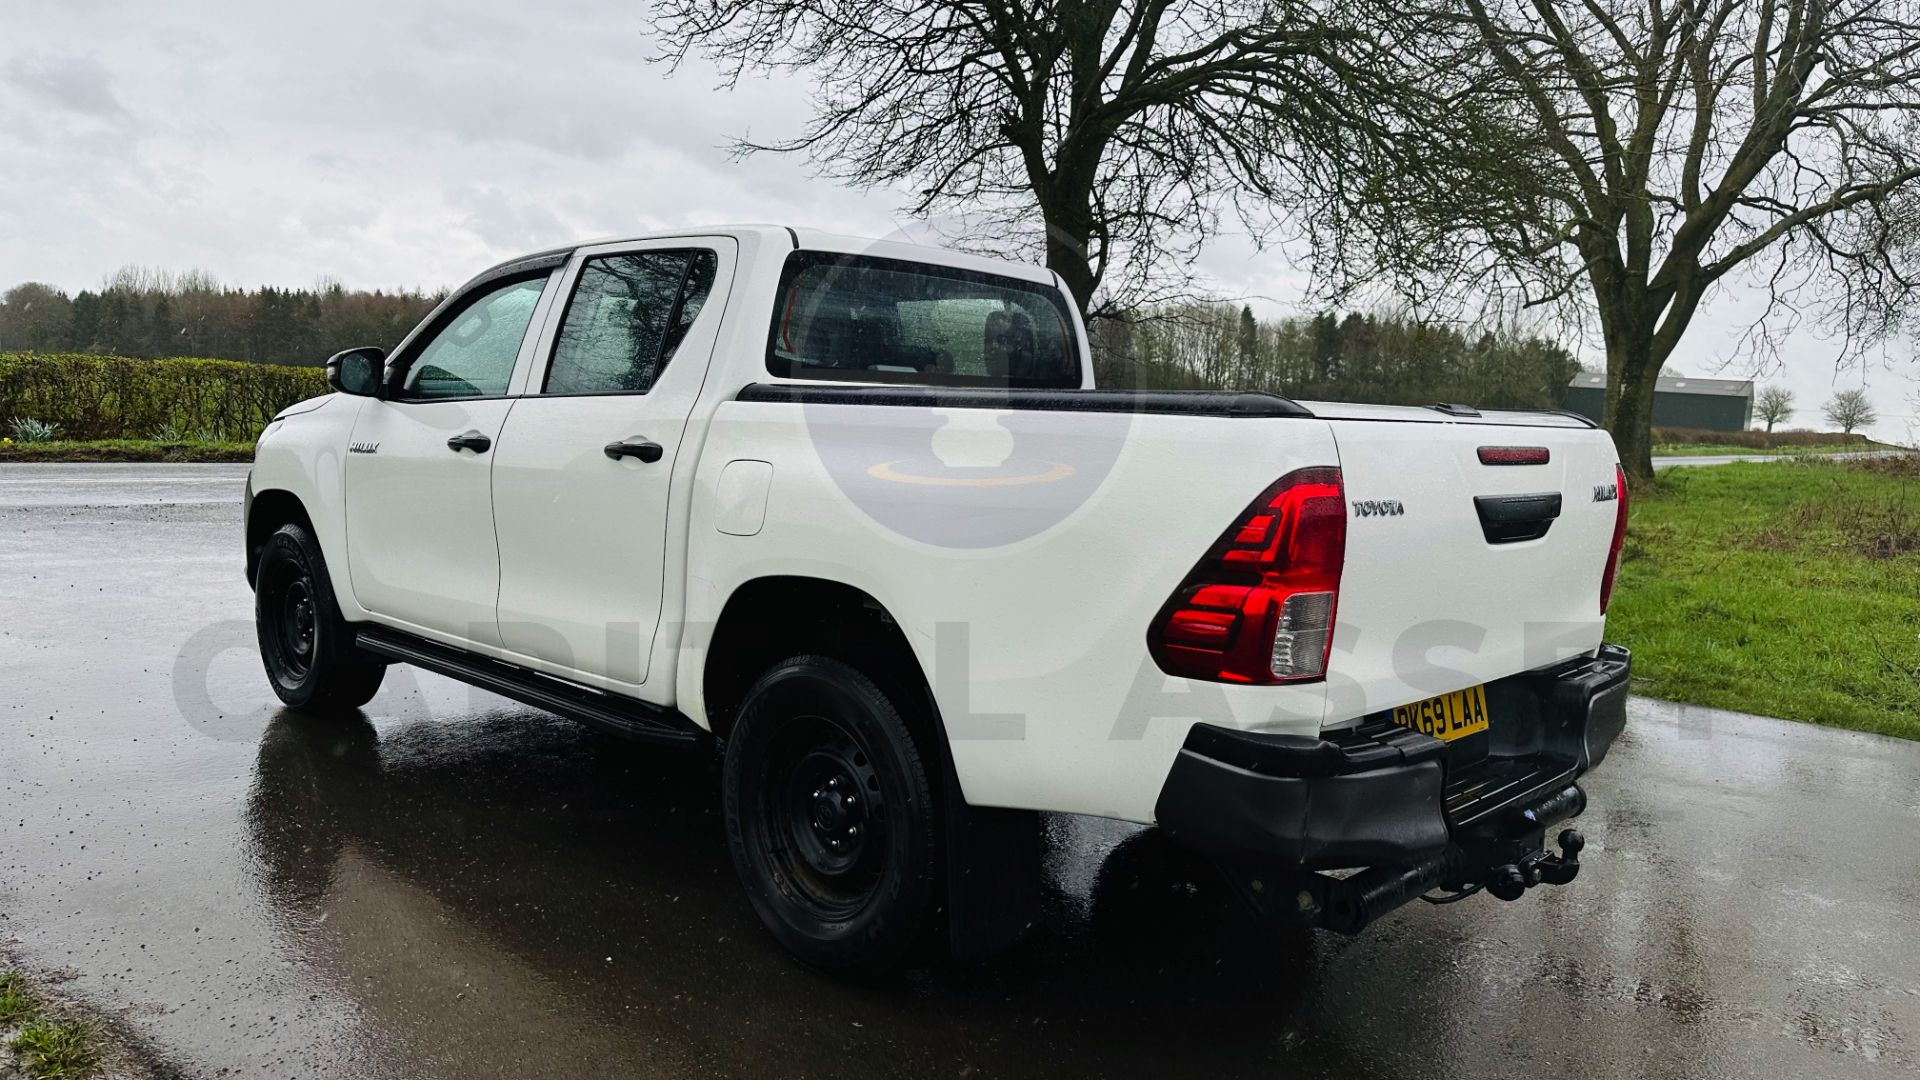 TOYOTA HILUX *DOUBLE CAB PICK-UP* (2020 - EURO 6) 2.4 D-4D - AUTO STOP/START *AIR CON* (1 OWNER) - Image 14 of 48